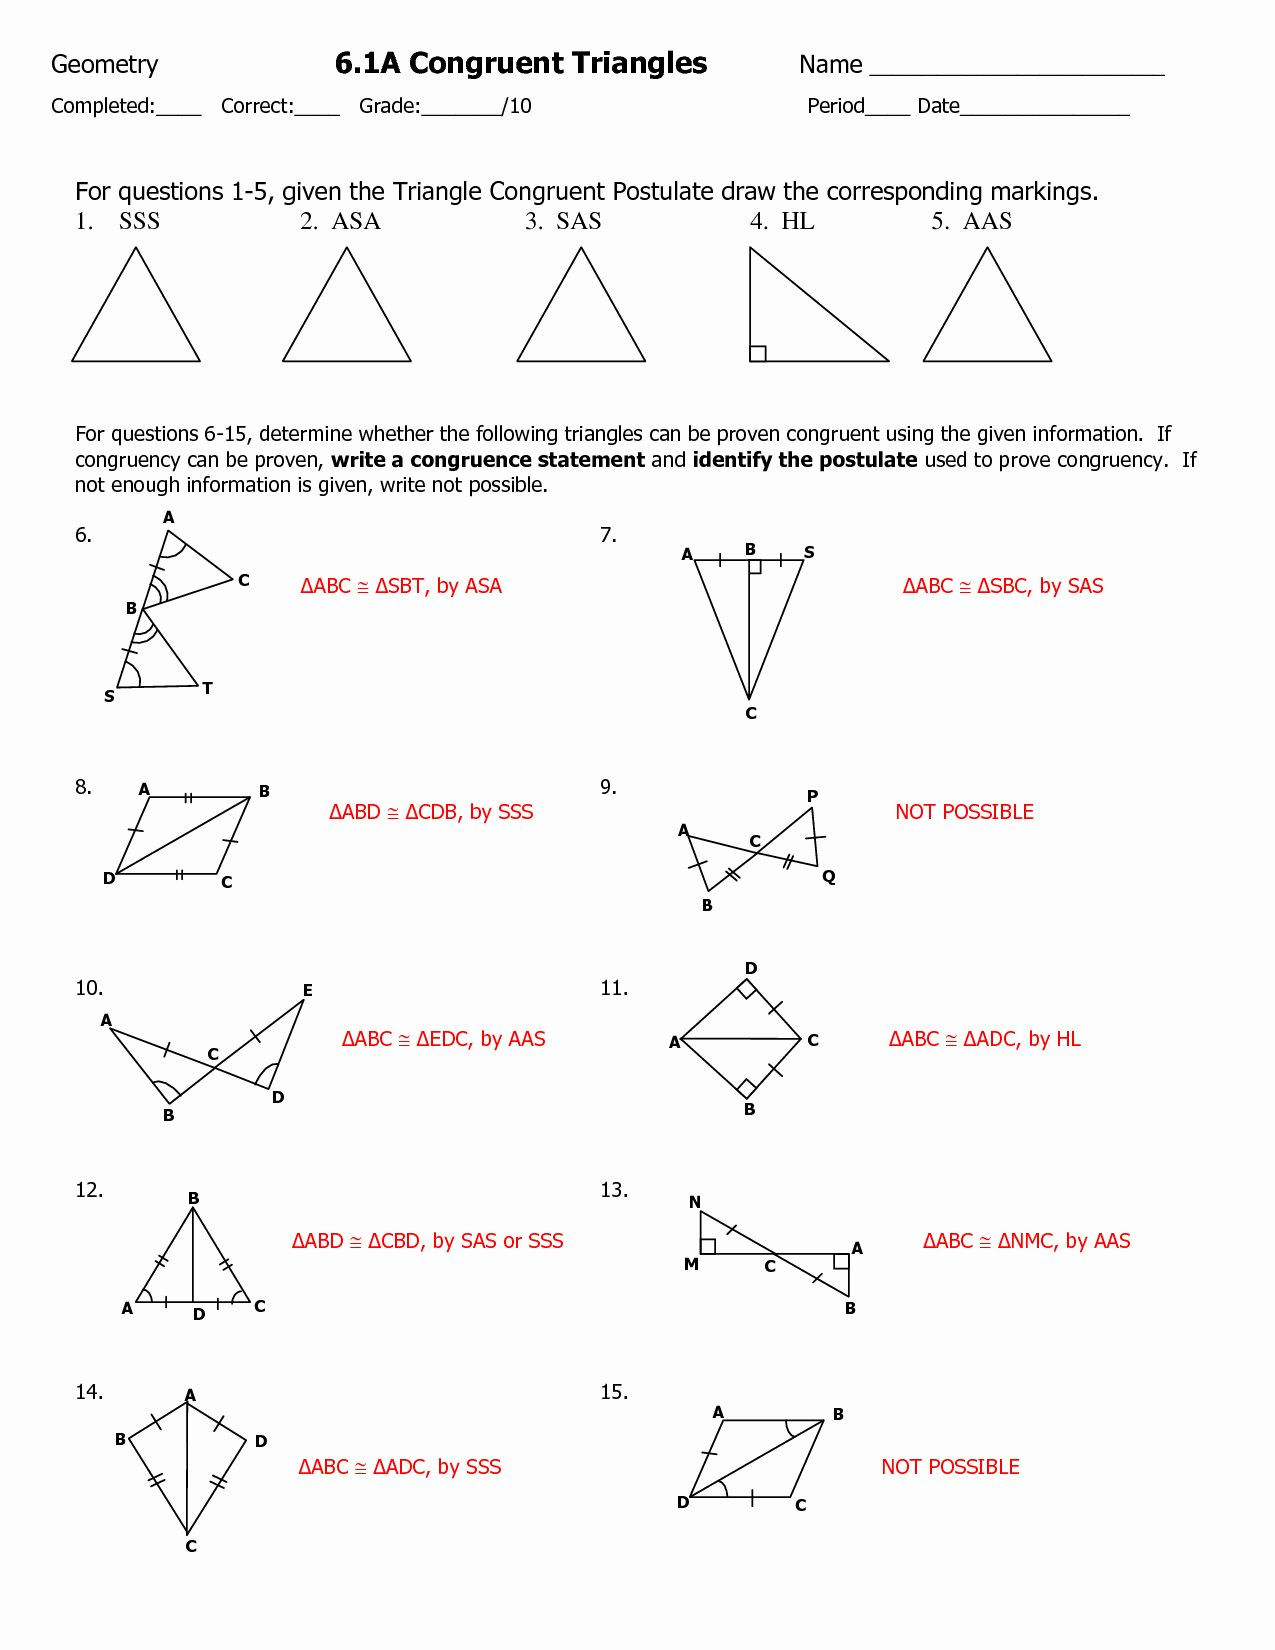 Proving Triangles Congruent Worksheet 50 Congruent Triangles Worksheet with Answer In 2020 with